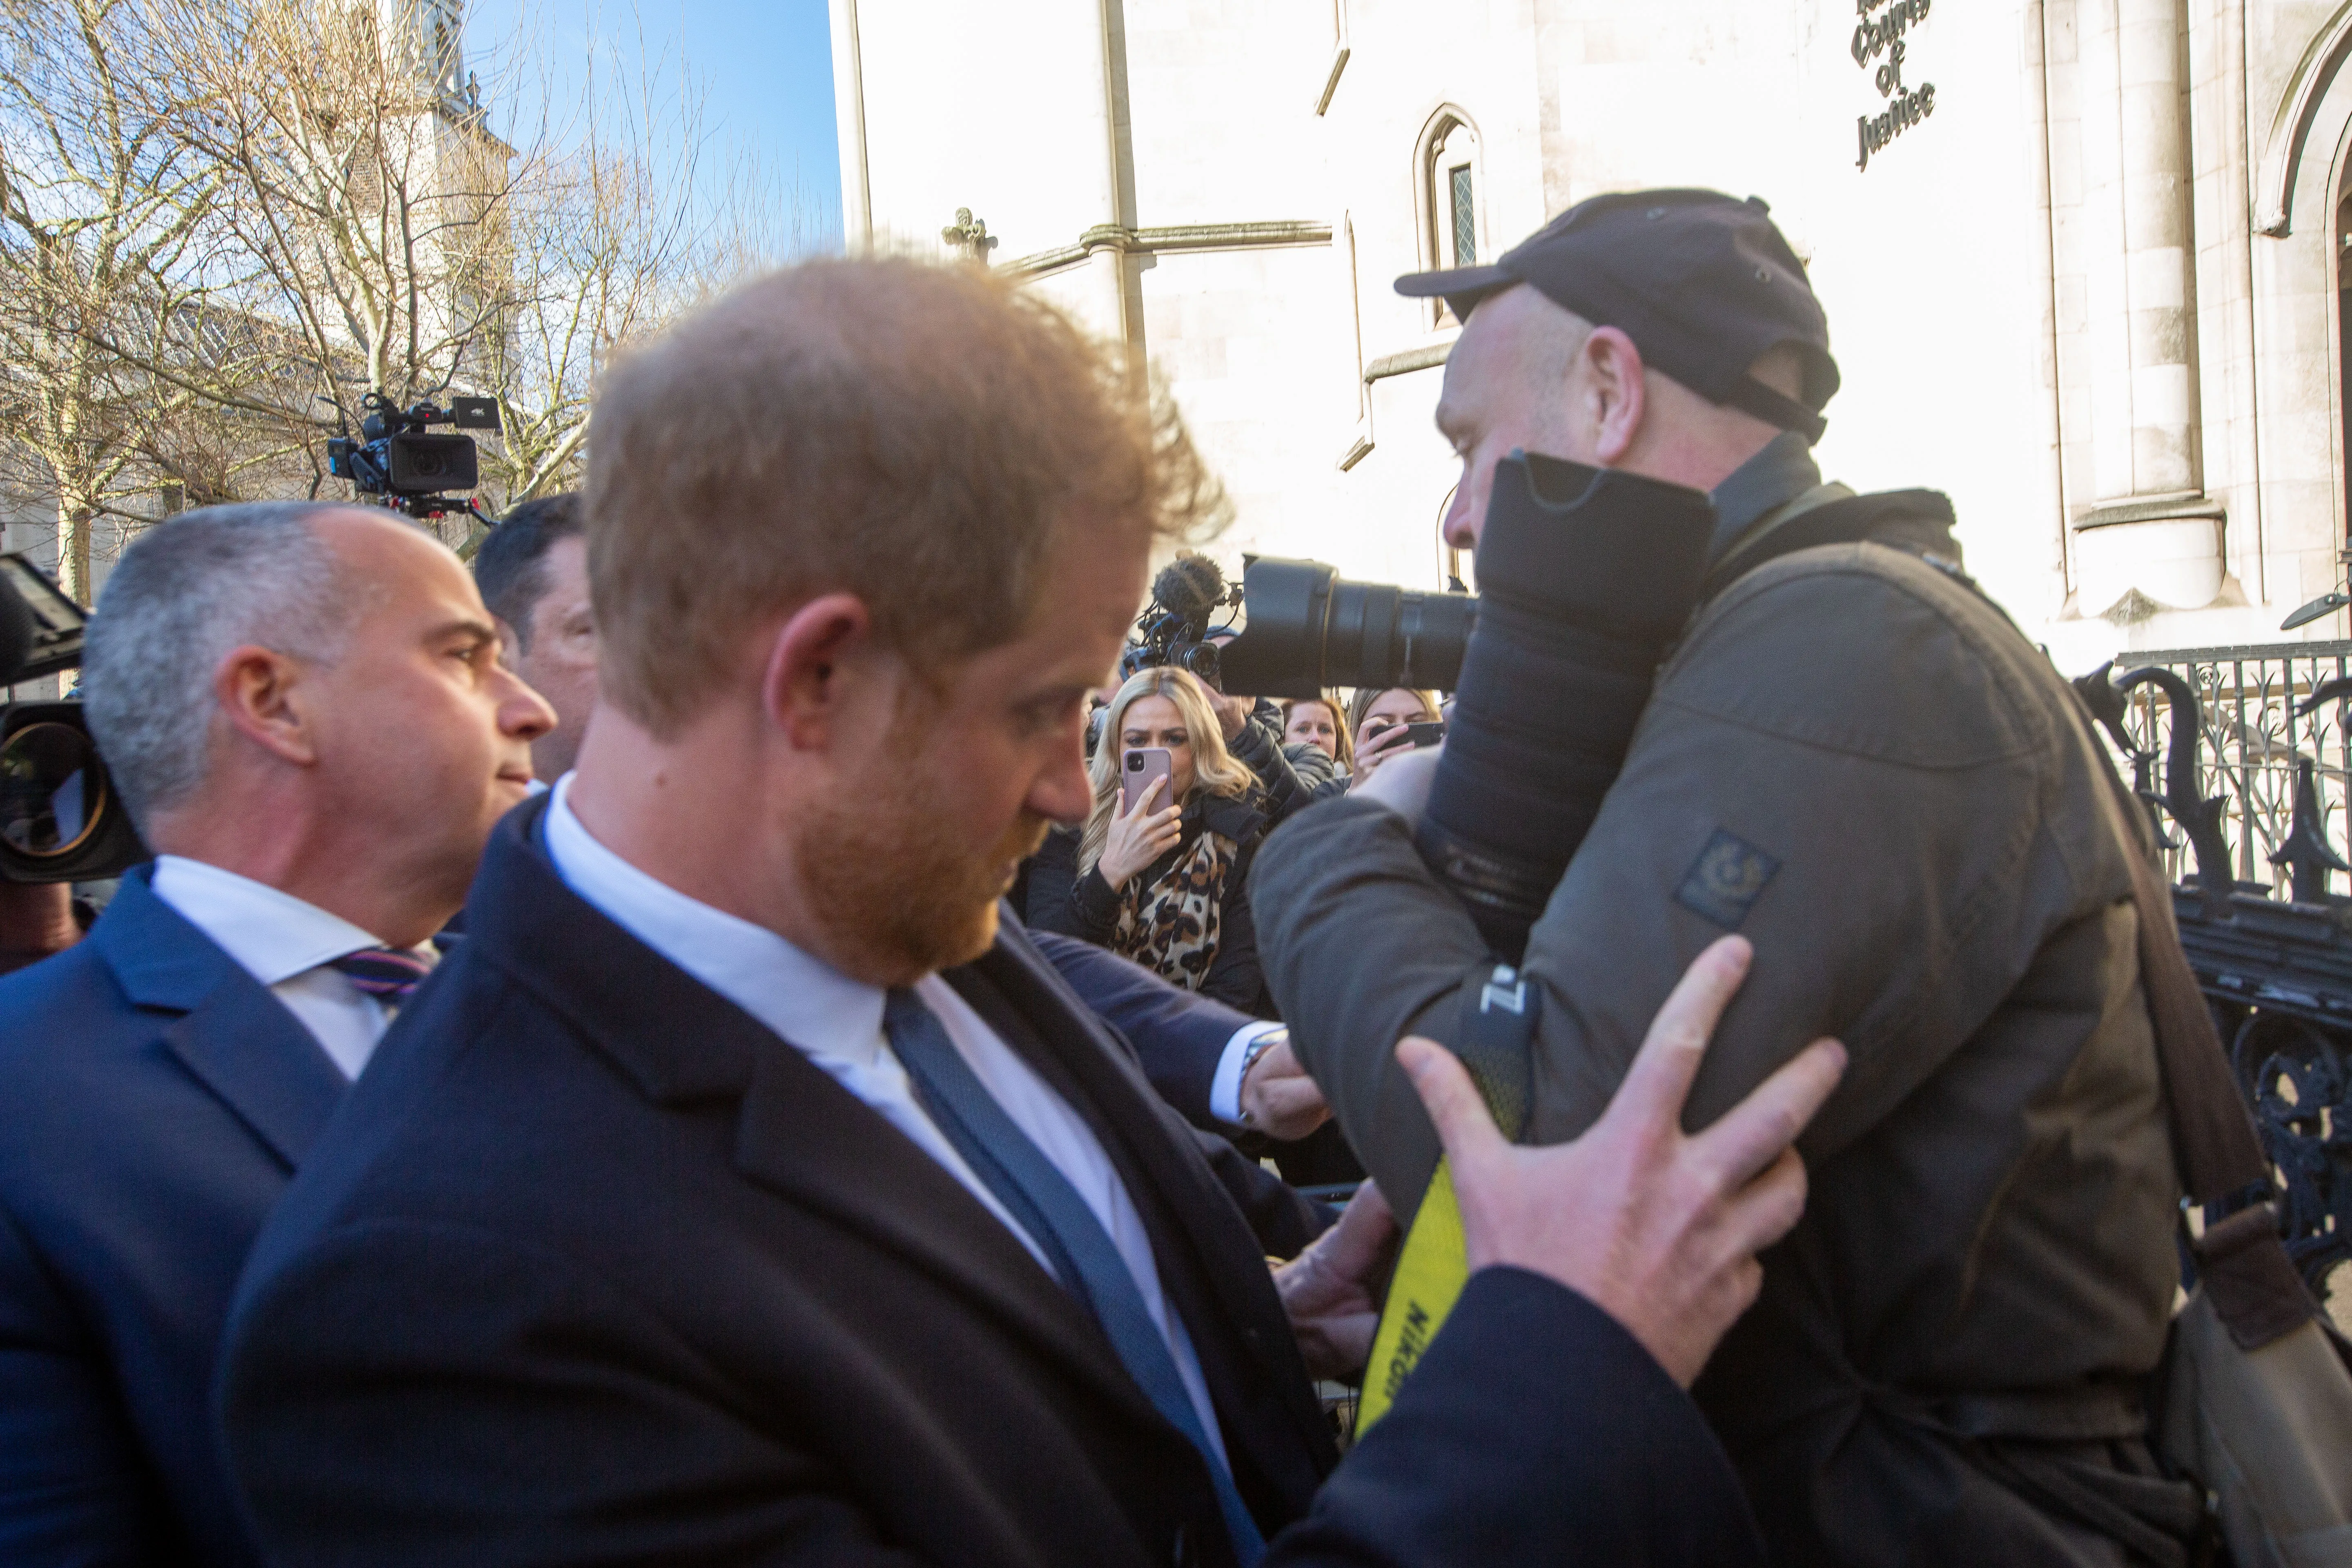 I’m a body language expert – Cocky Prince Harry swaggered into court like an Apprentice contestant